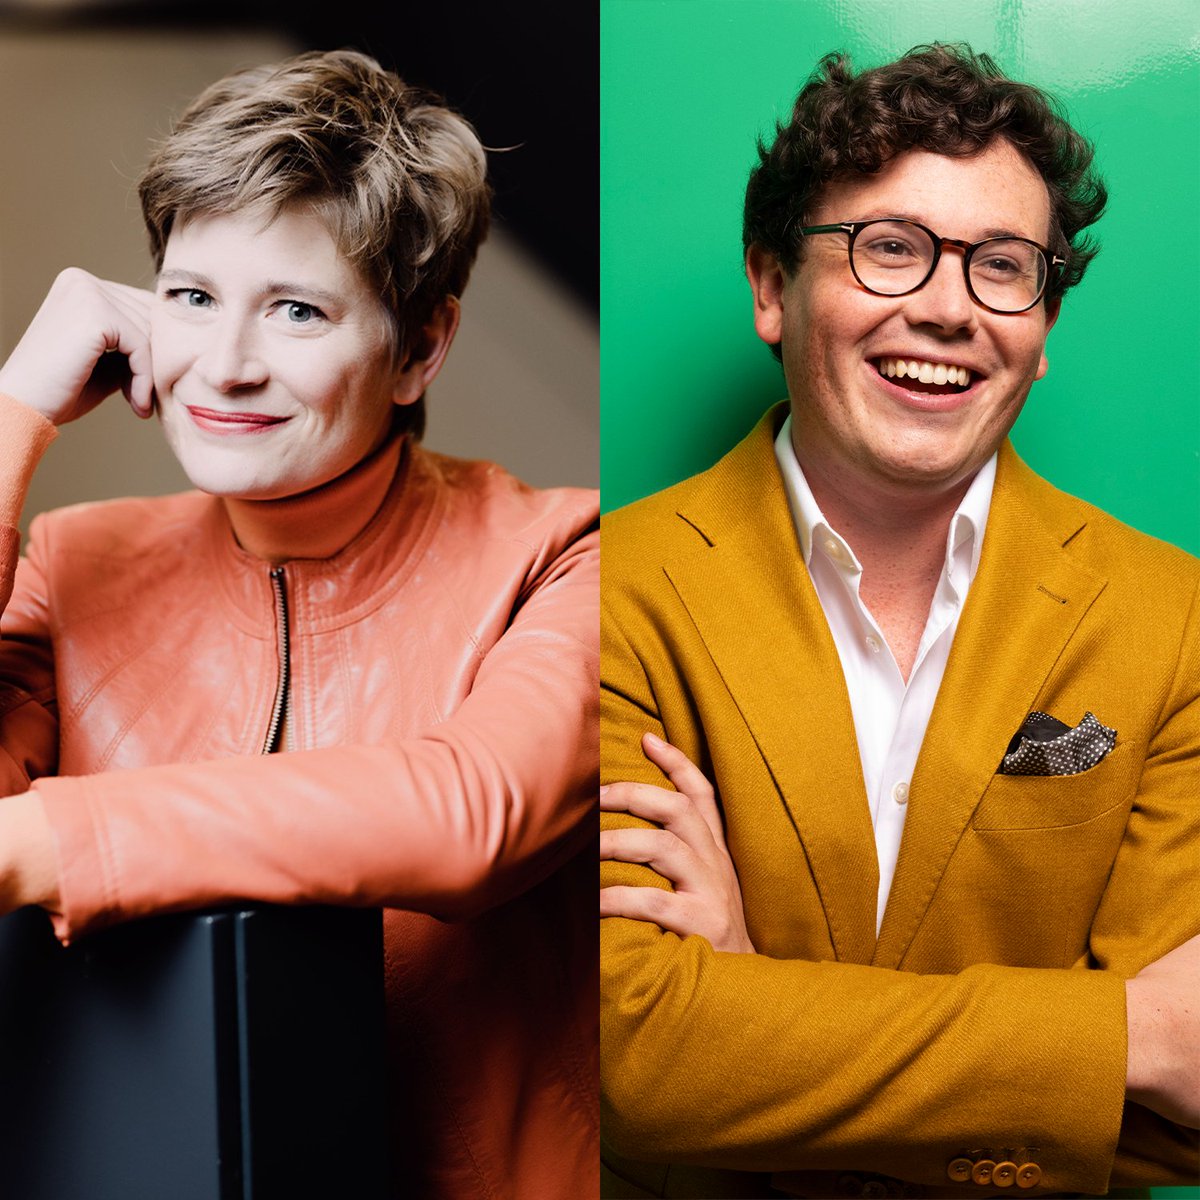 This evening, Intermusica artists Anja Bihlmaier and @MJBartlettPiano perform with the @LPOrchestra at the Royal Festival Hall, London. 🎟️ Book tickets: lpo.org.uk/event/beethove… 🔗 Read more: intermusica.com/news/4961 #Intermusica #ClassicalMusic #Performance #London #UK